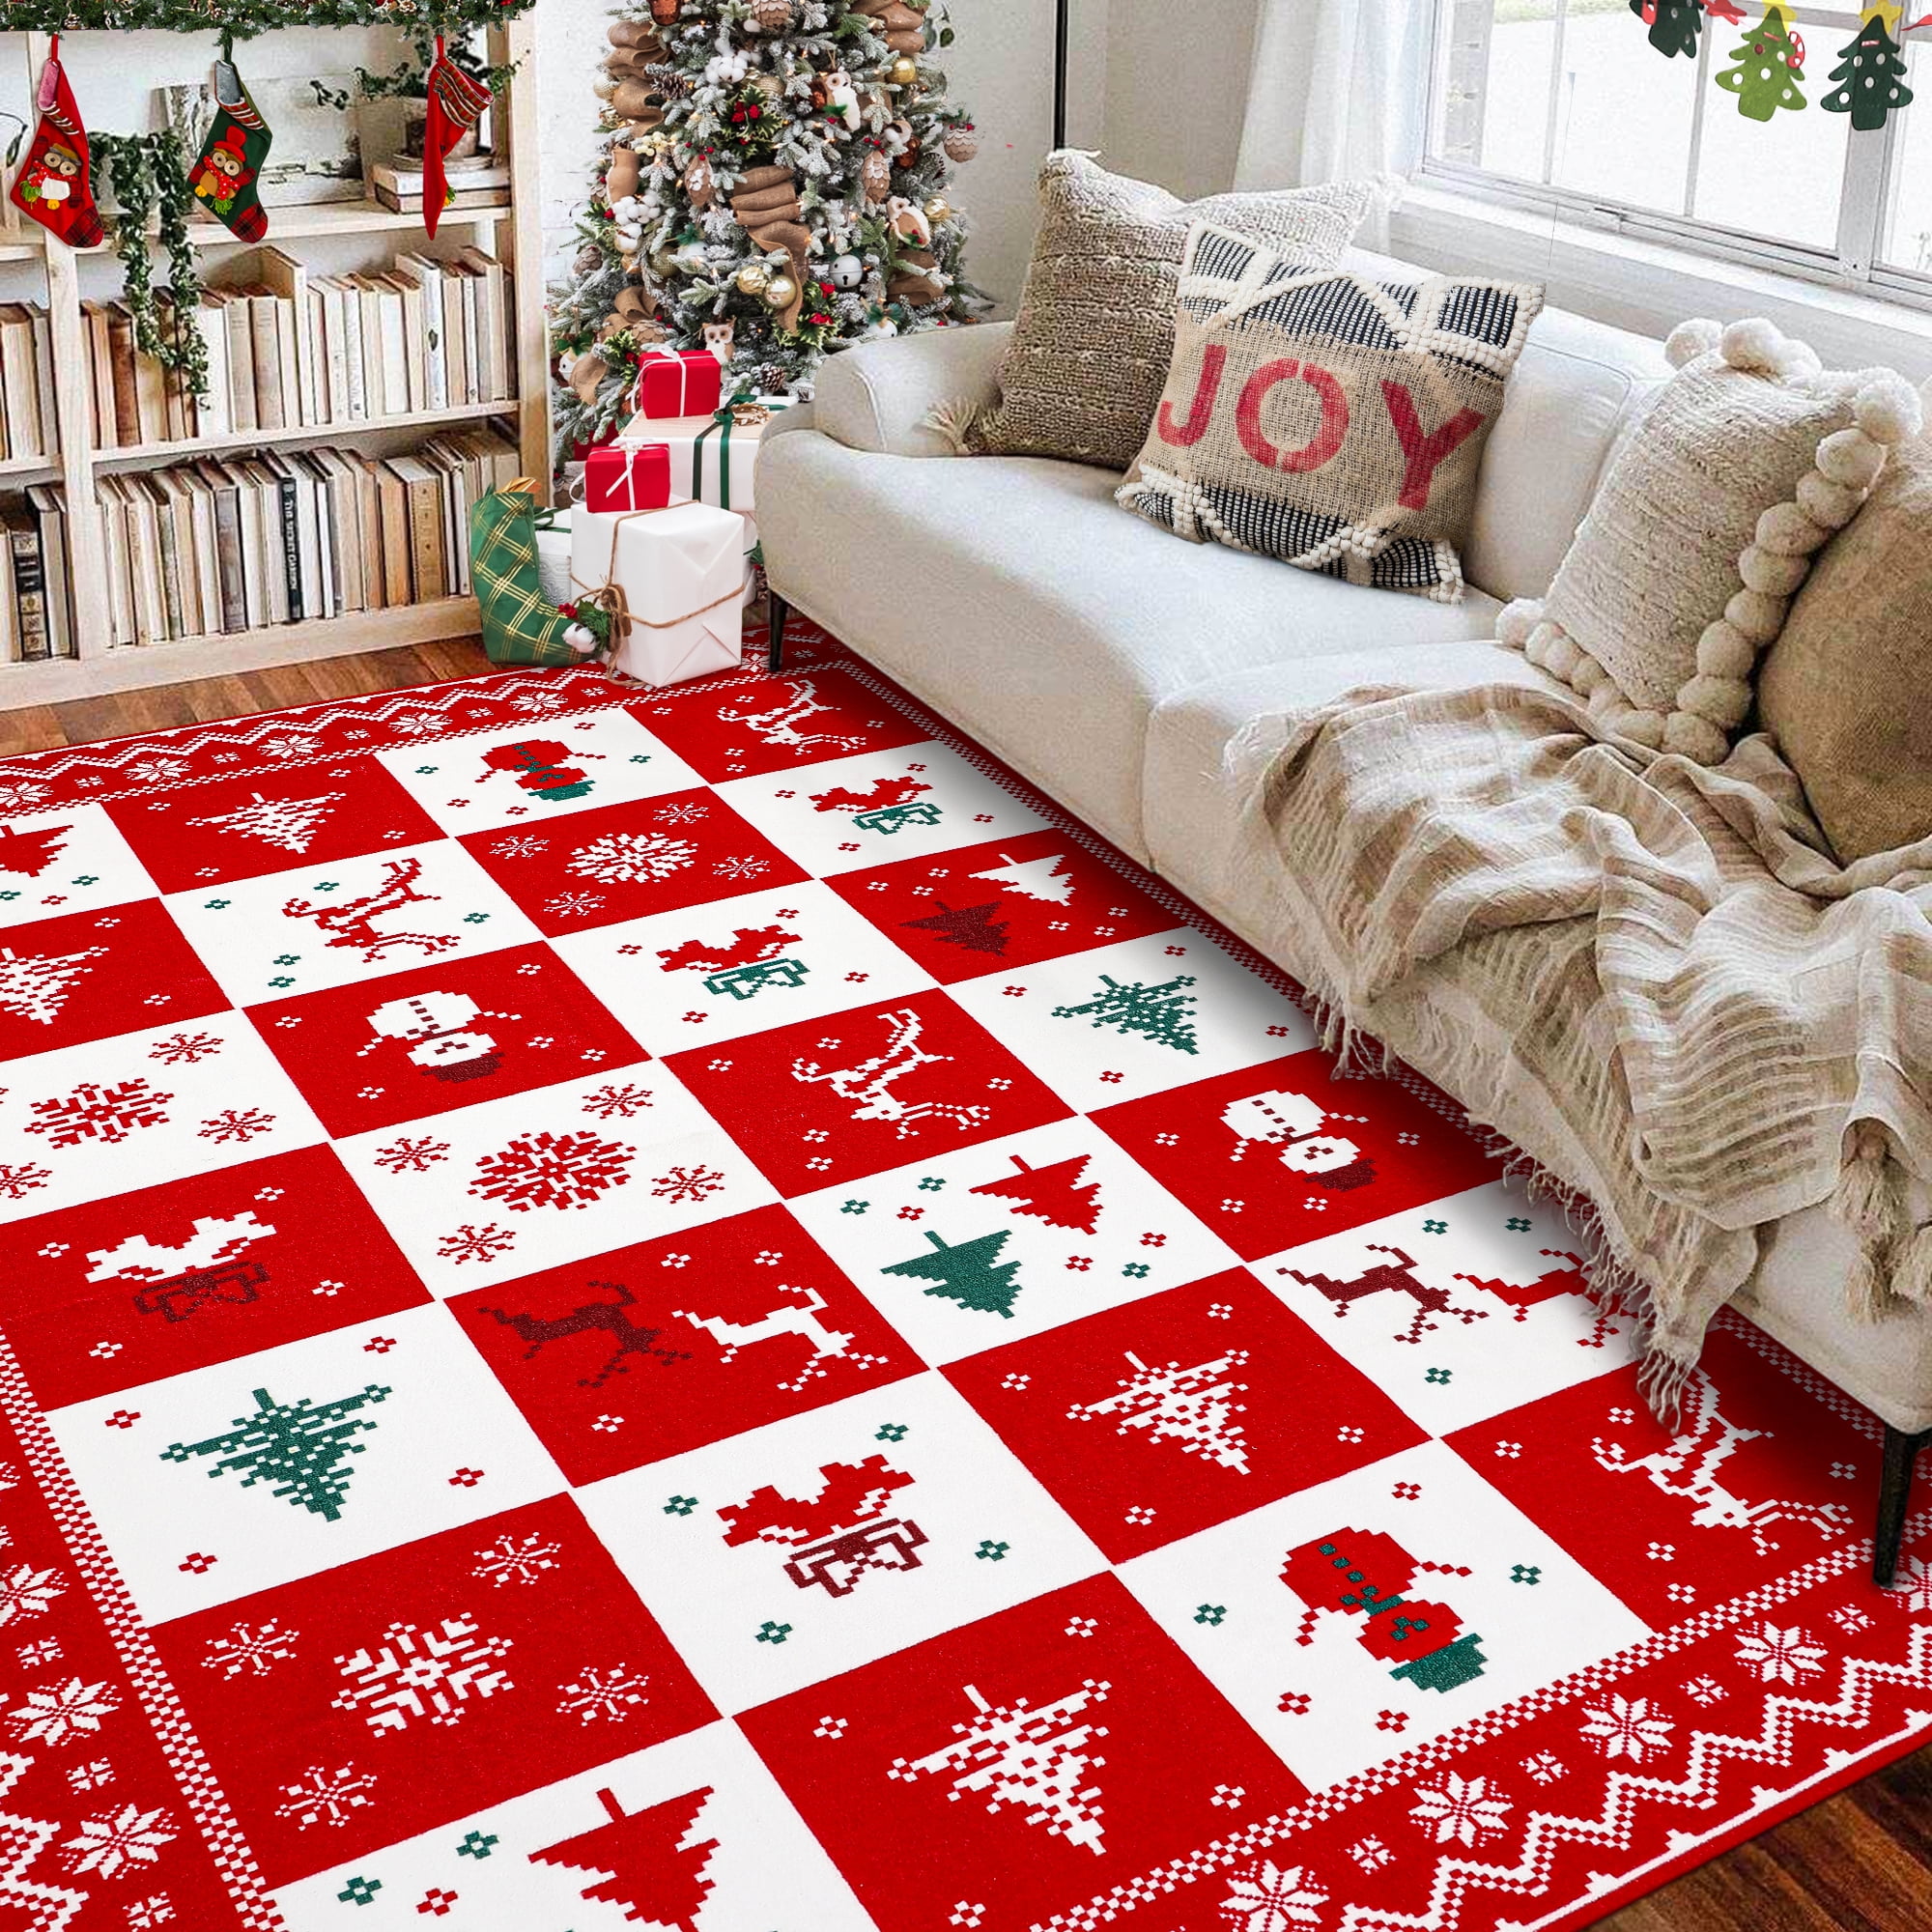 Uphome Christmas Area Rug 3x5, Red Washable Indoor Entryway Rug, Urtra-Thin  Soft Non-Slip Winter Snowflake Holiday Rug, Cute Christmas Tree Floor